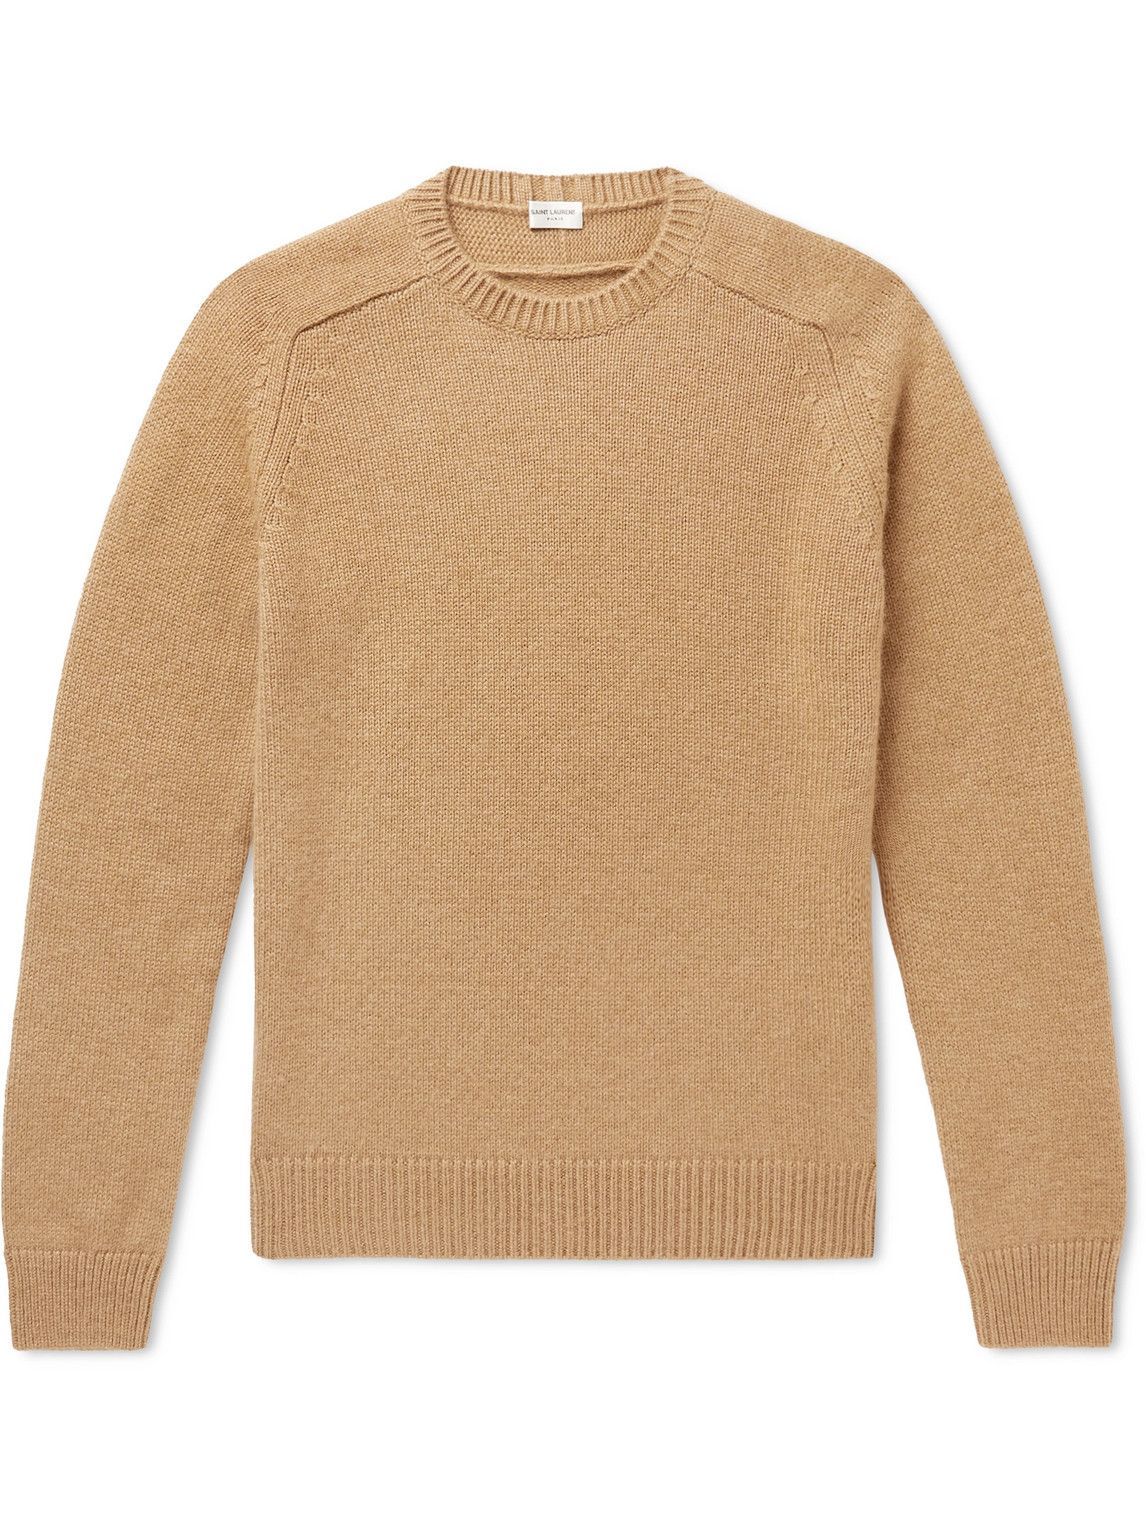 Womens Jumpers and knitwear Saint Laurent Jumpers and knitwear Saint Laurent Ribbed-knit Camel Hair Sweater in Brown 